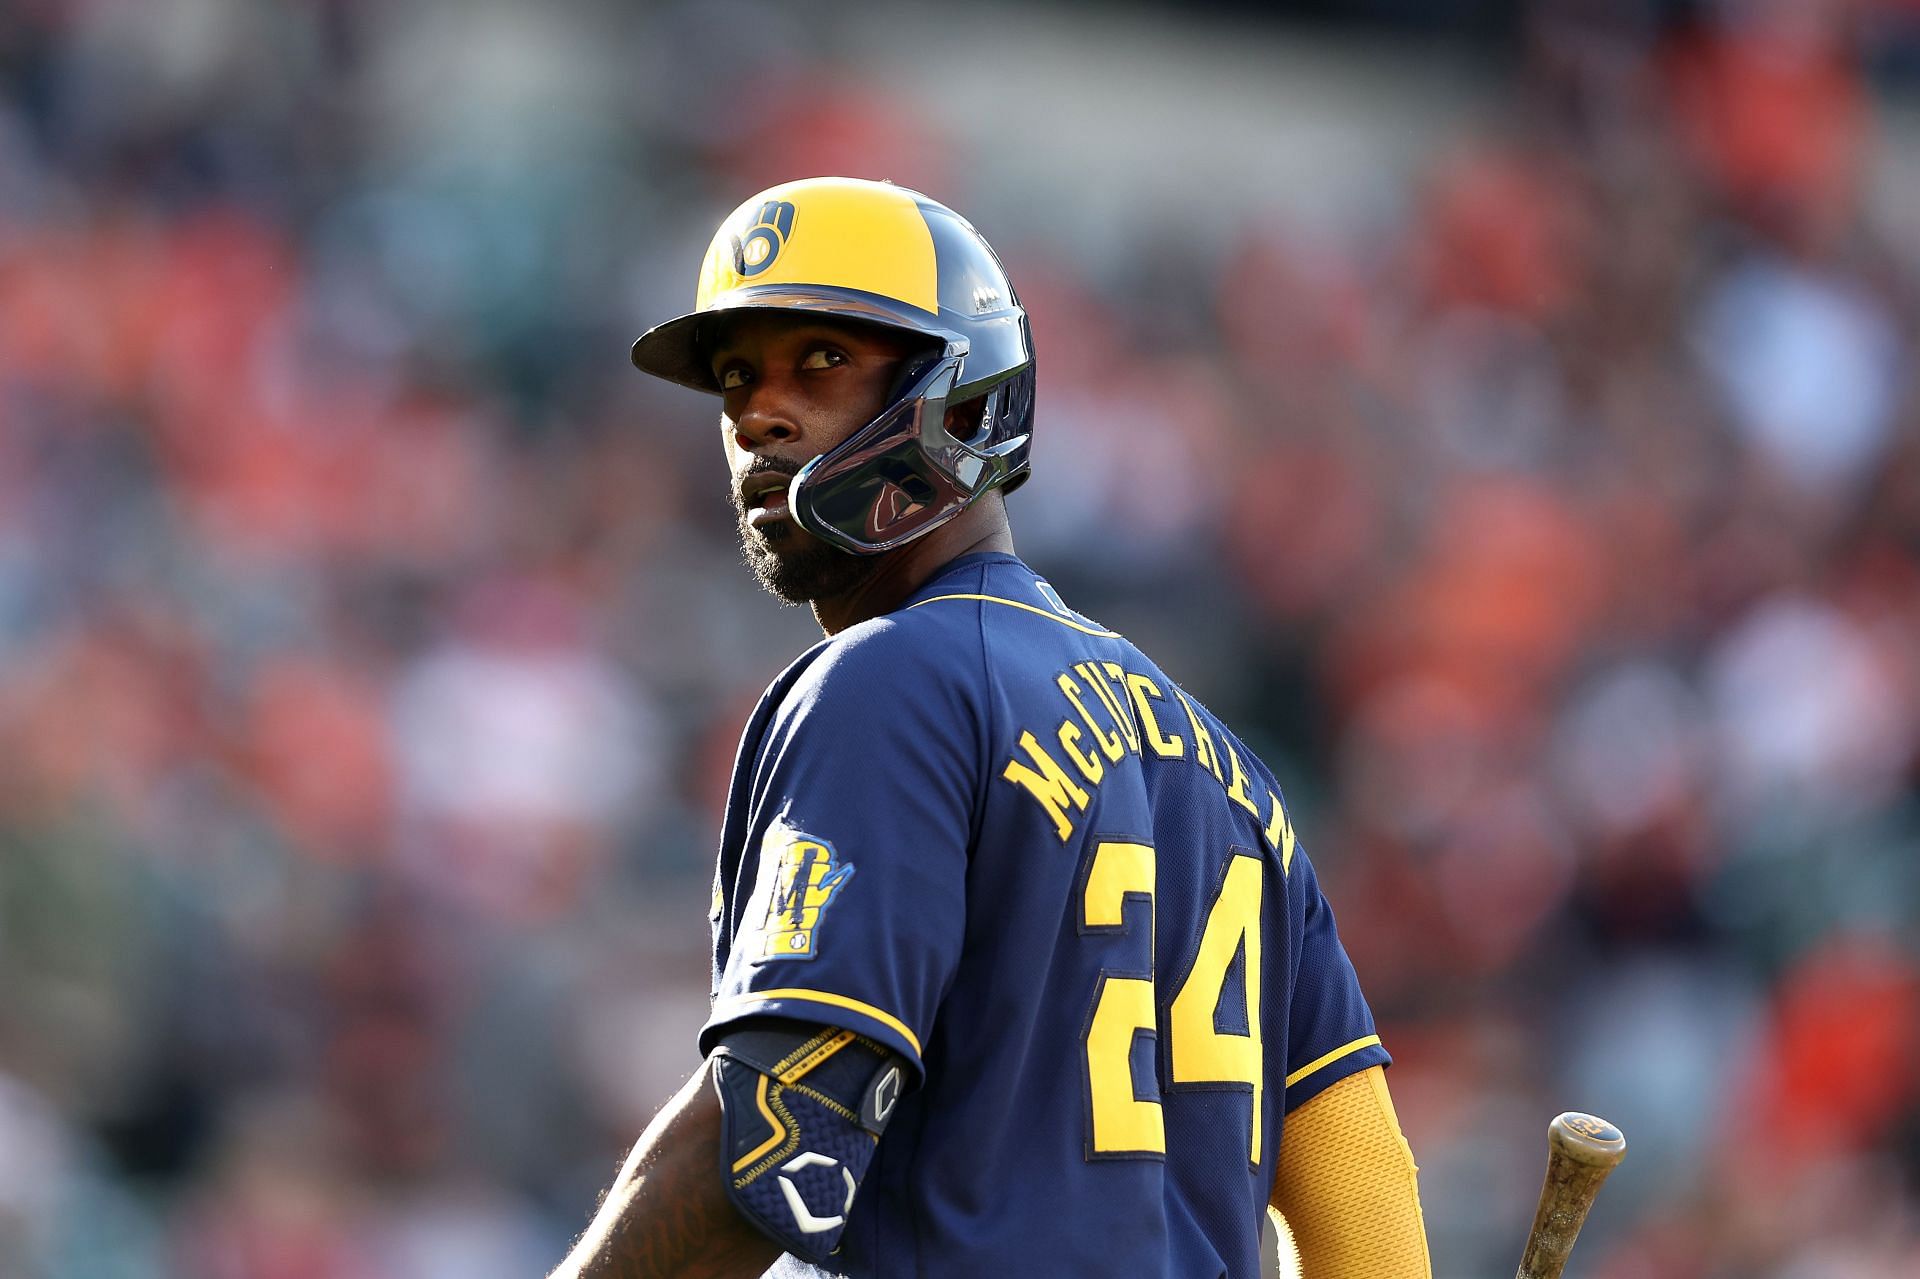 Andrew McCutchen says the Brewers have to keep the momentum going